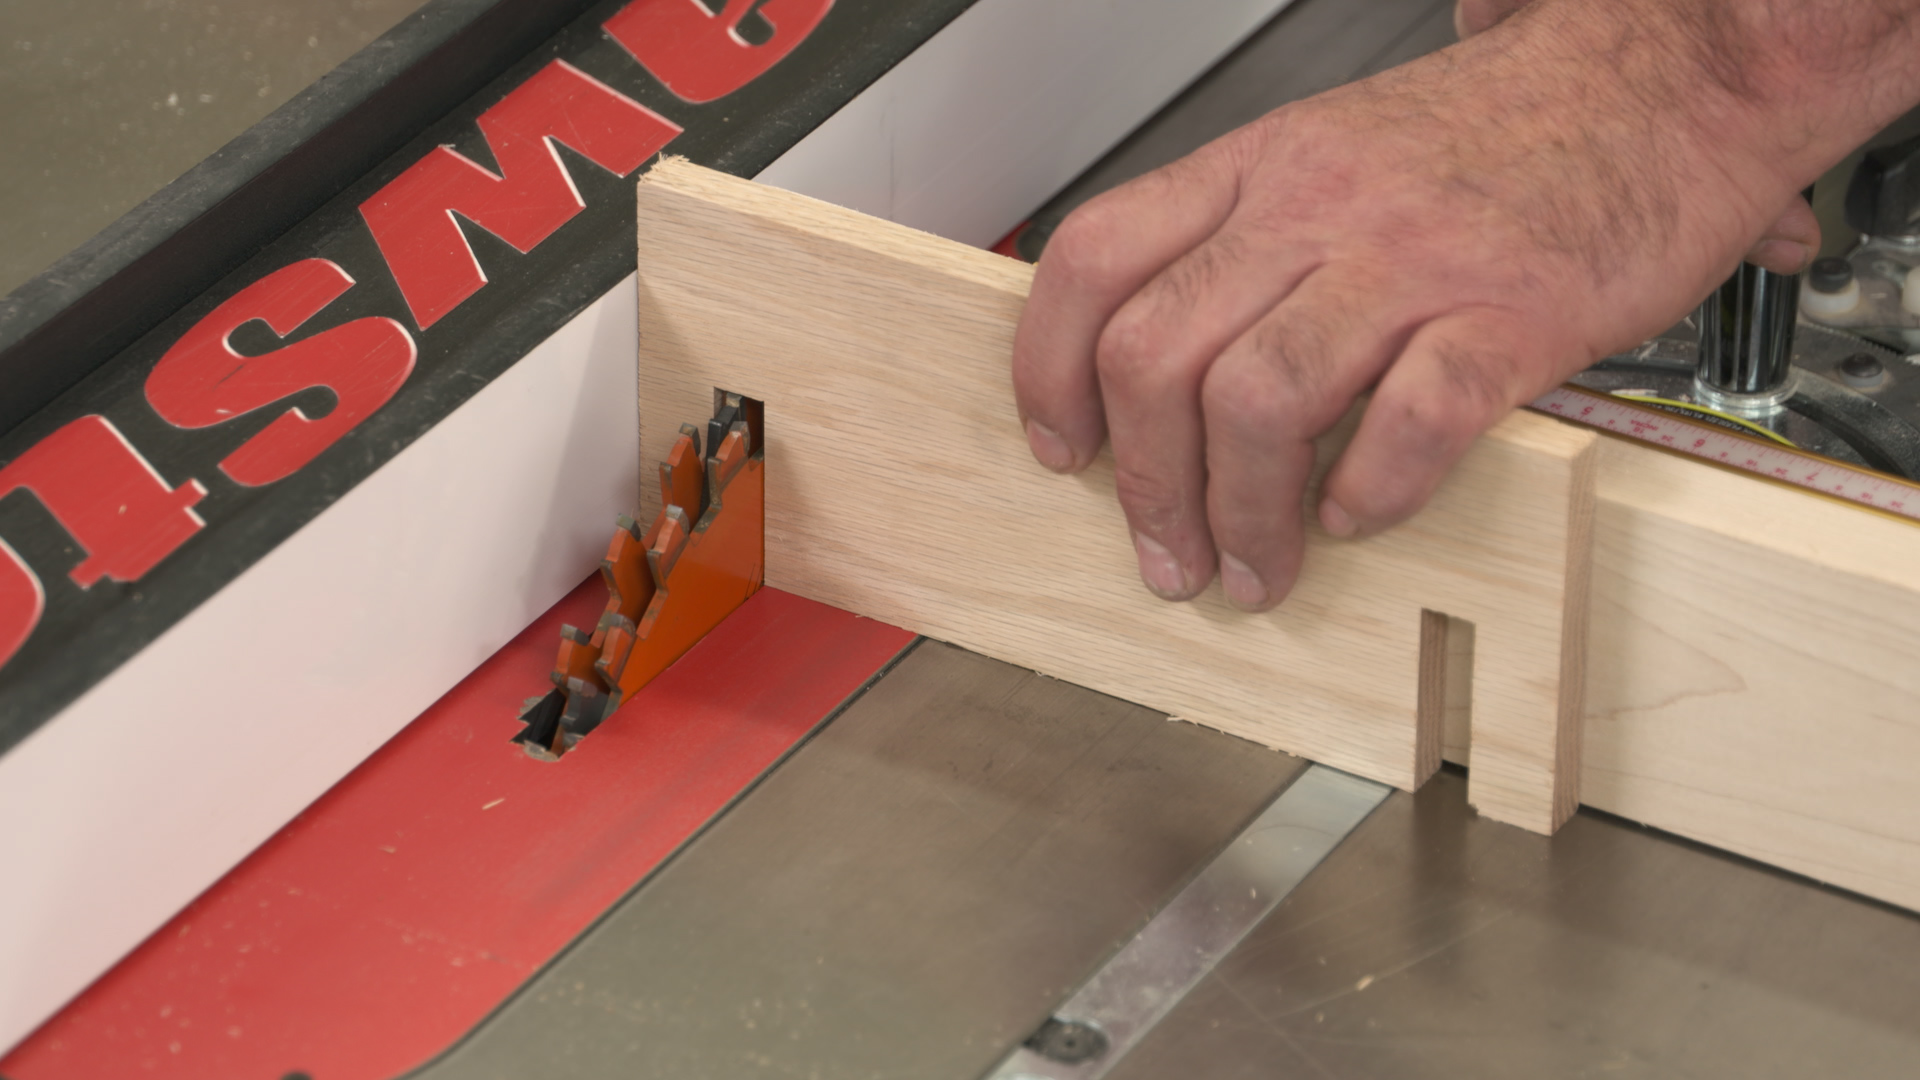 Session 3:  Cross Halving and Drawer Joints